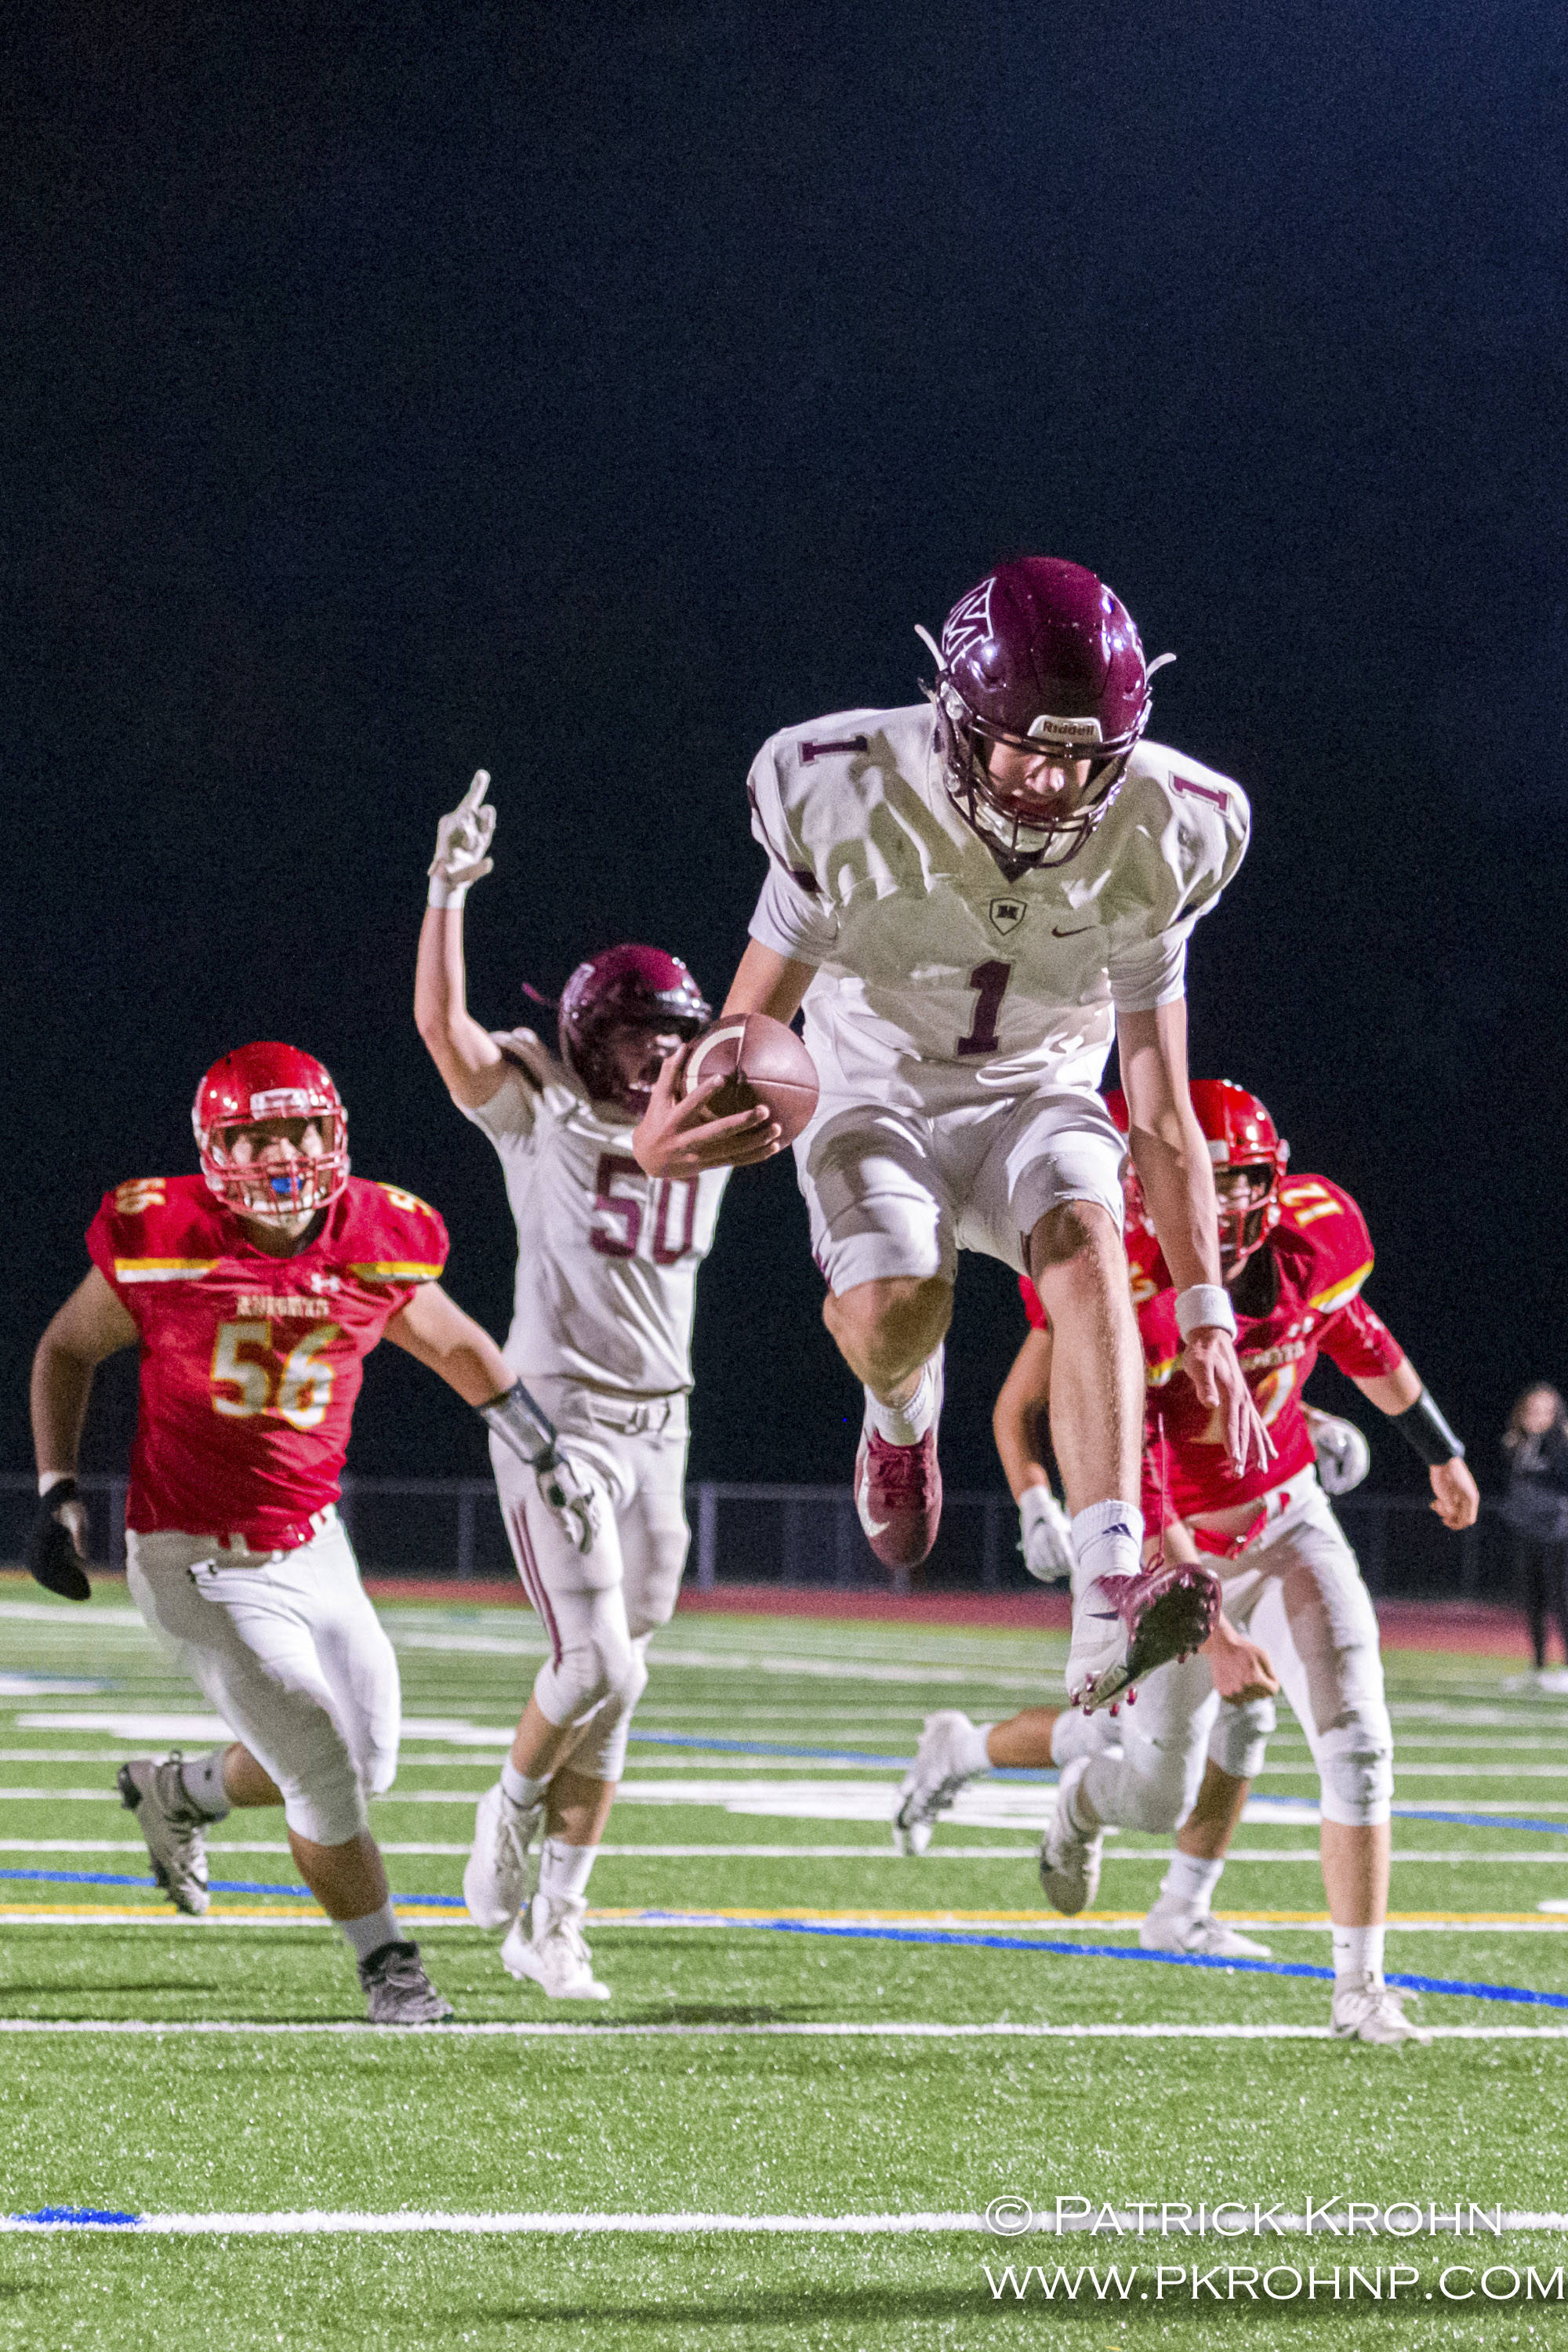 Mercer Island quarterback Liam Rogan leaps into the end zone in the second quarter of their 27-17 victory over the Newport Knights on Sept. 20. Photo courtesy of Patrick Krohn/Patrick Krohn Photography